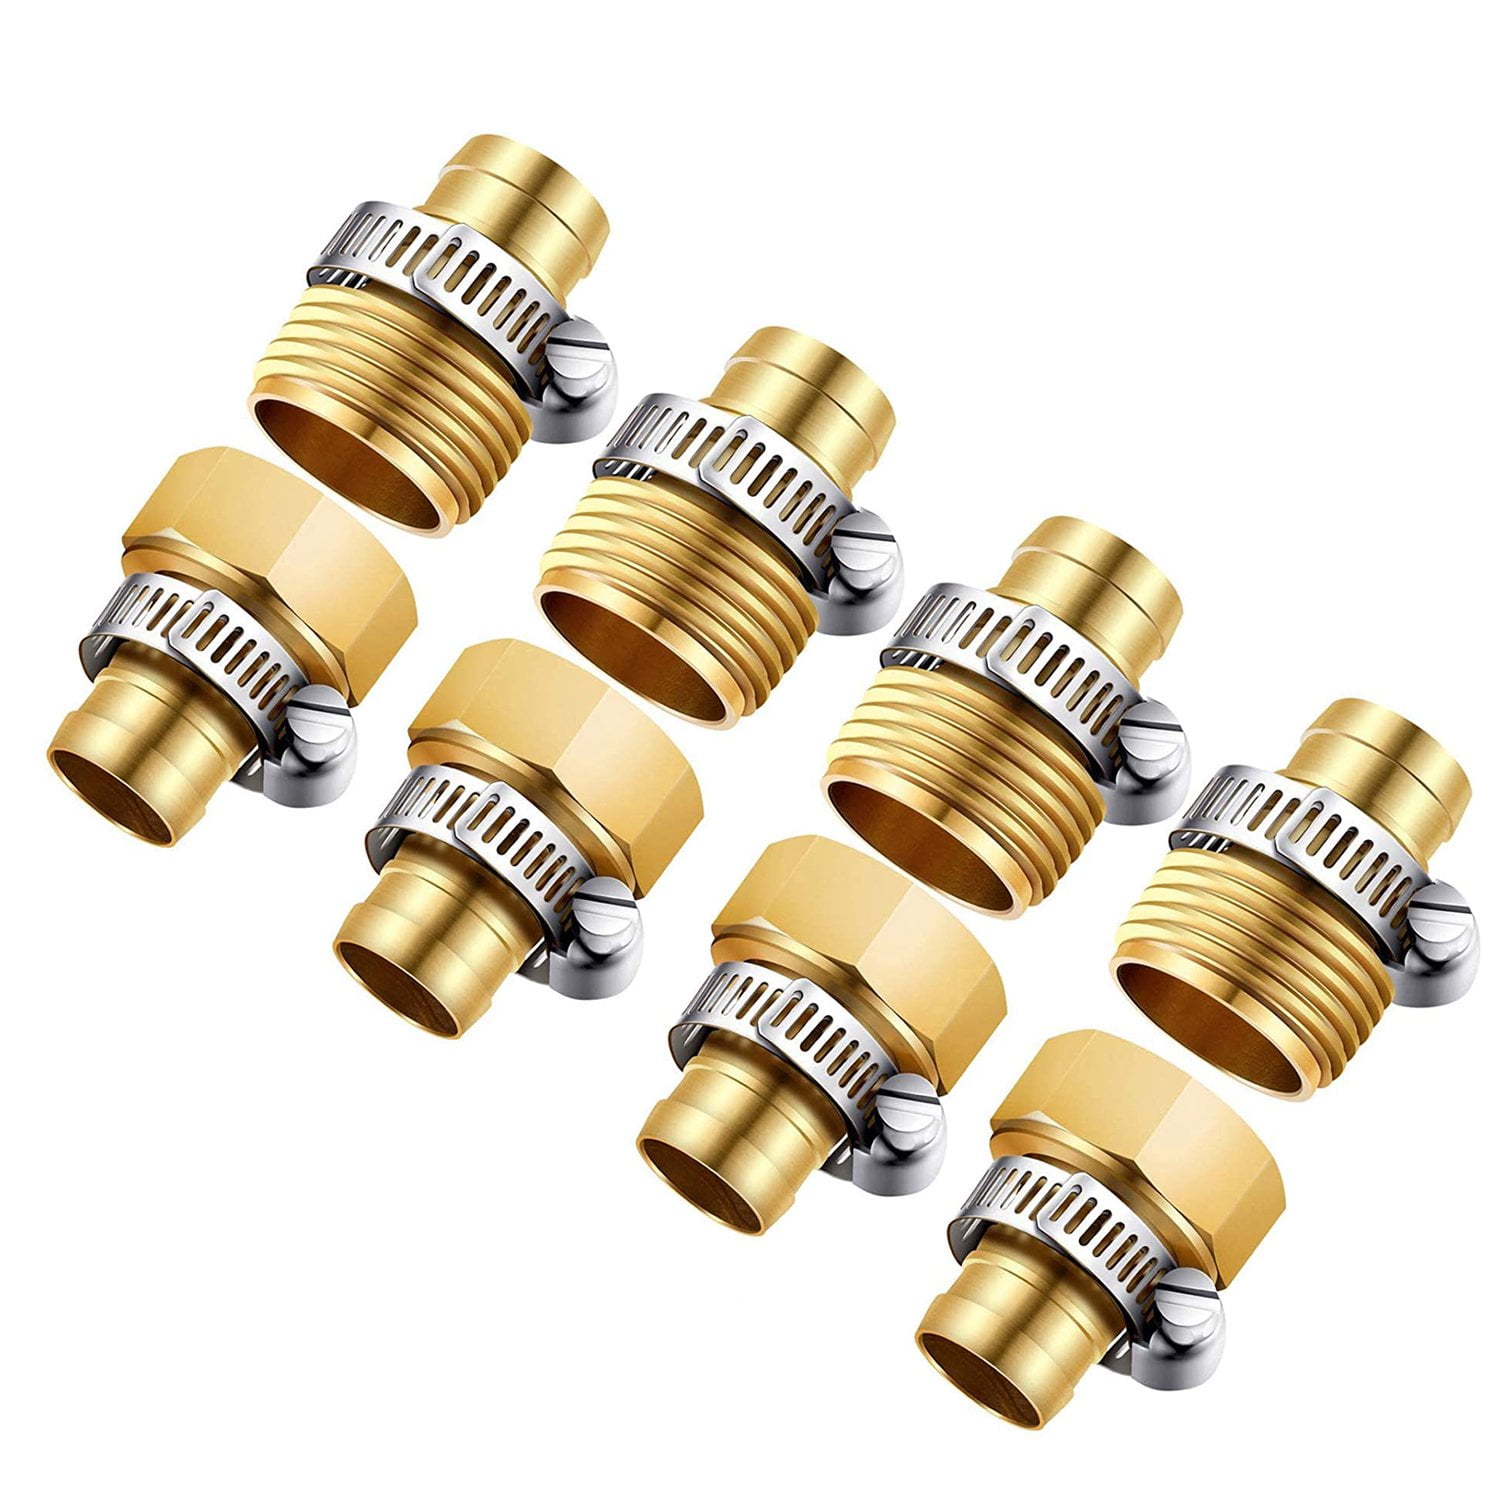 4 Pack 5/8 Inch Brass Garden Hose Repair Kit, Male and Female Hose  Fittings, Garden Hose Fitting with 8 Pieces Stainless Steel Clamps